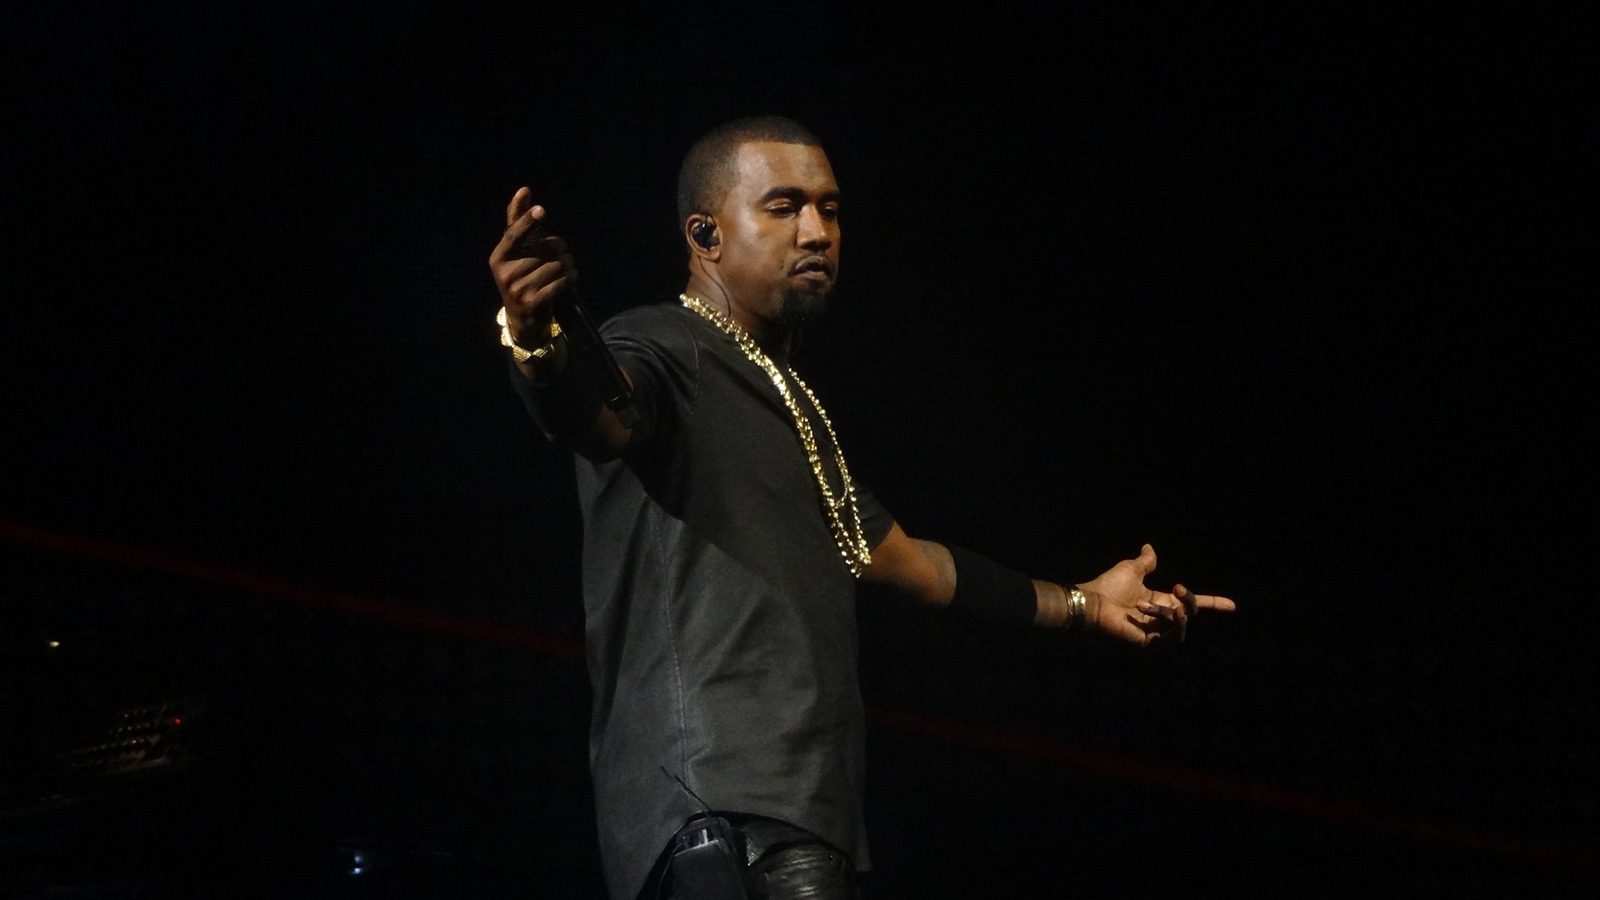 Donda: Kanye West breaks streaming records on Apple Music with top album in 130 countries